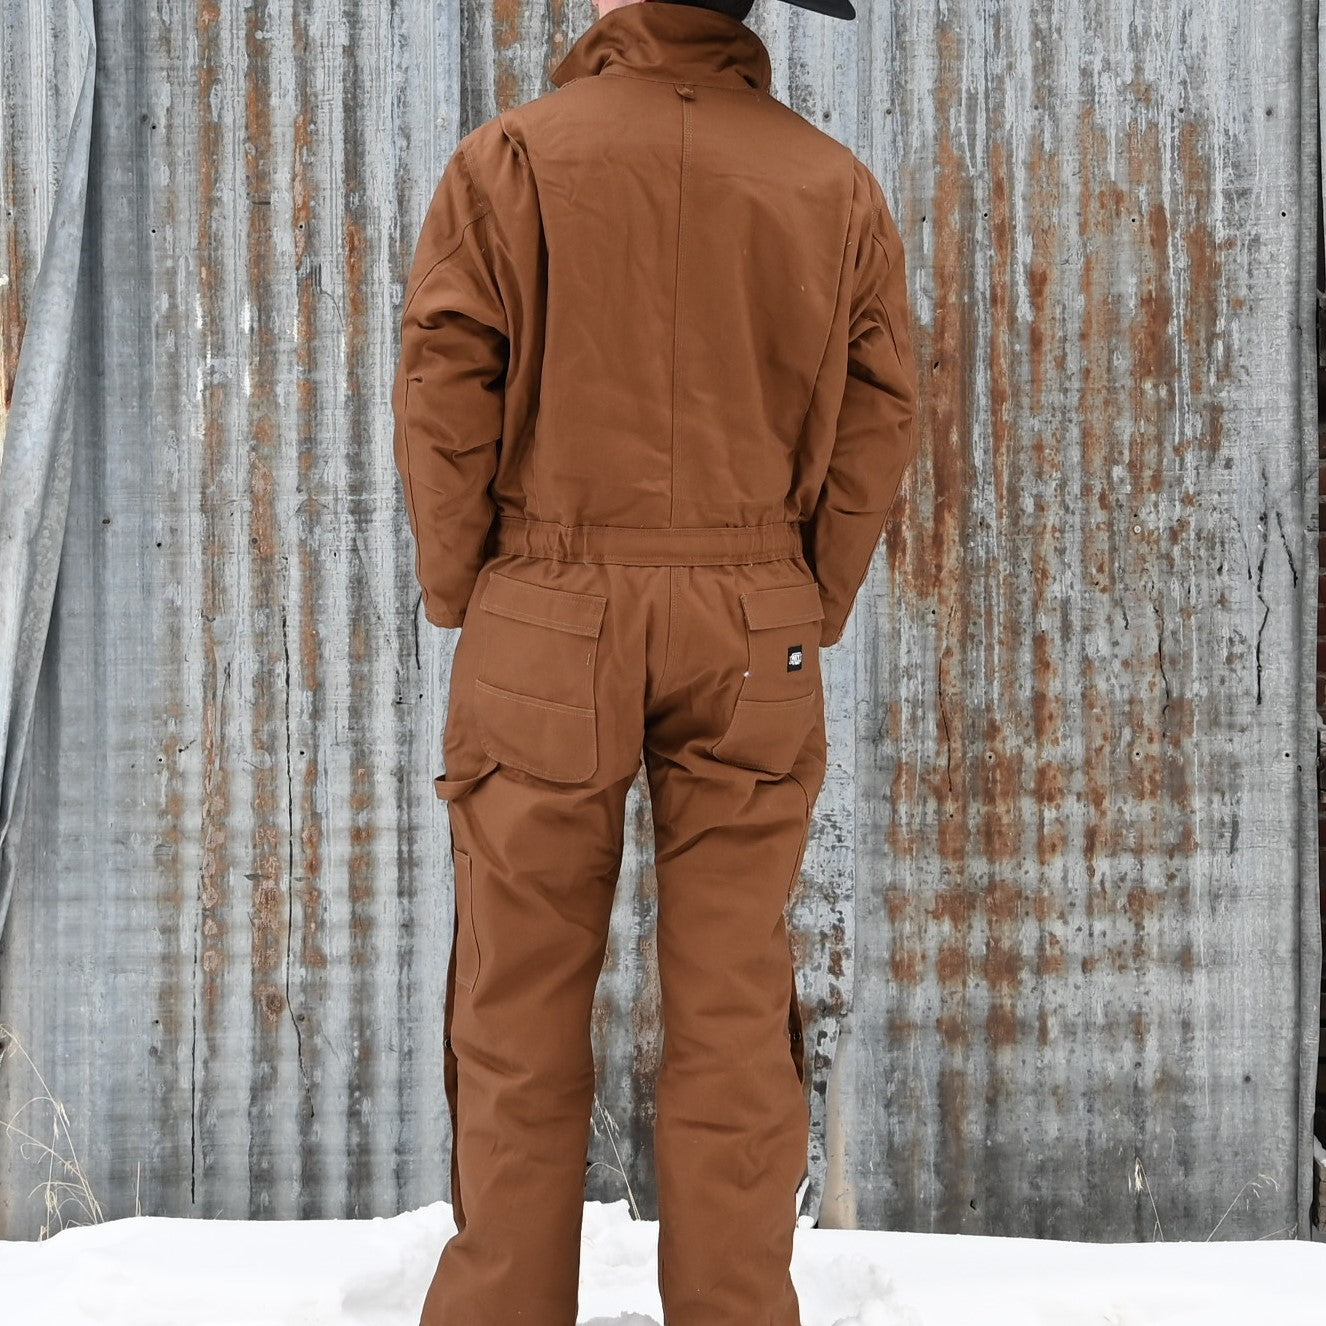 Key Ind Insulated Coverall in Saddle view of back of coveralls